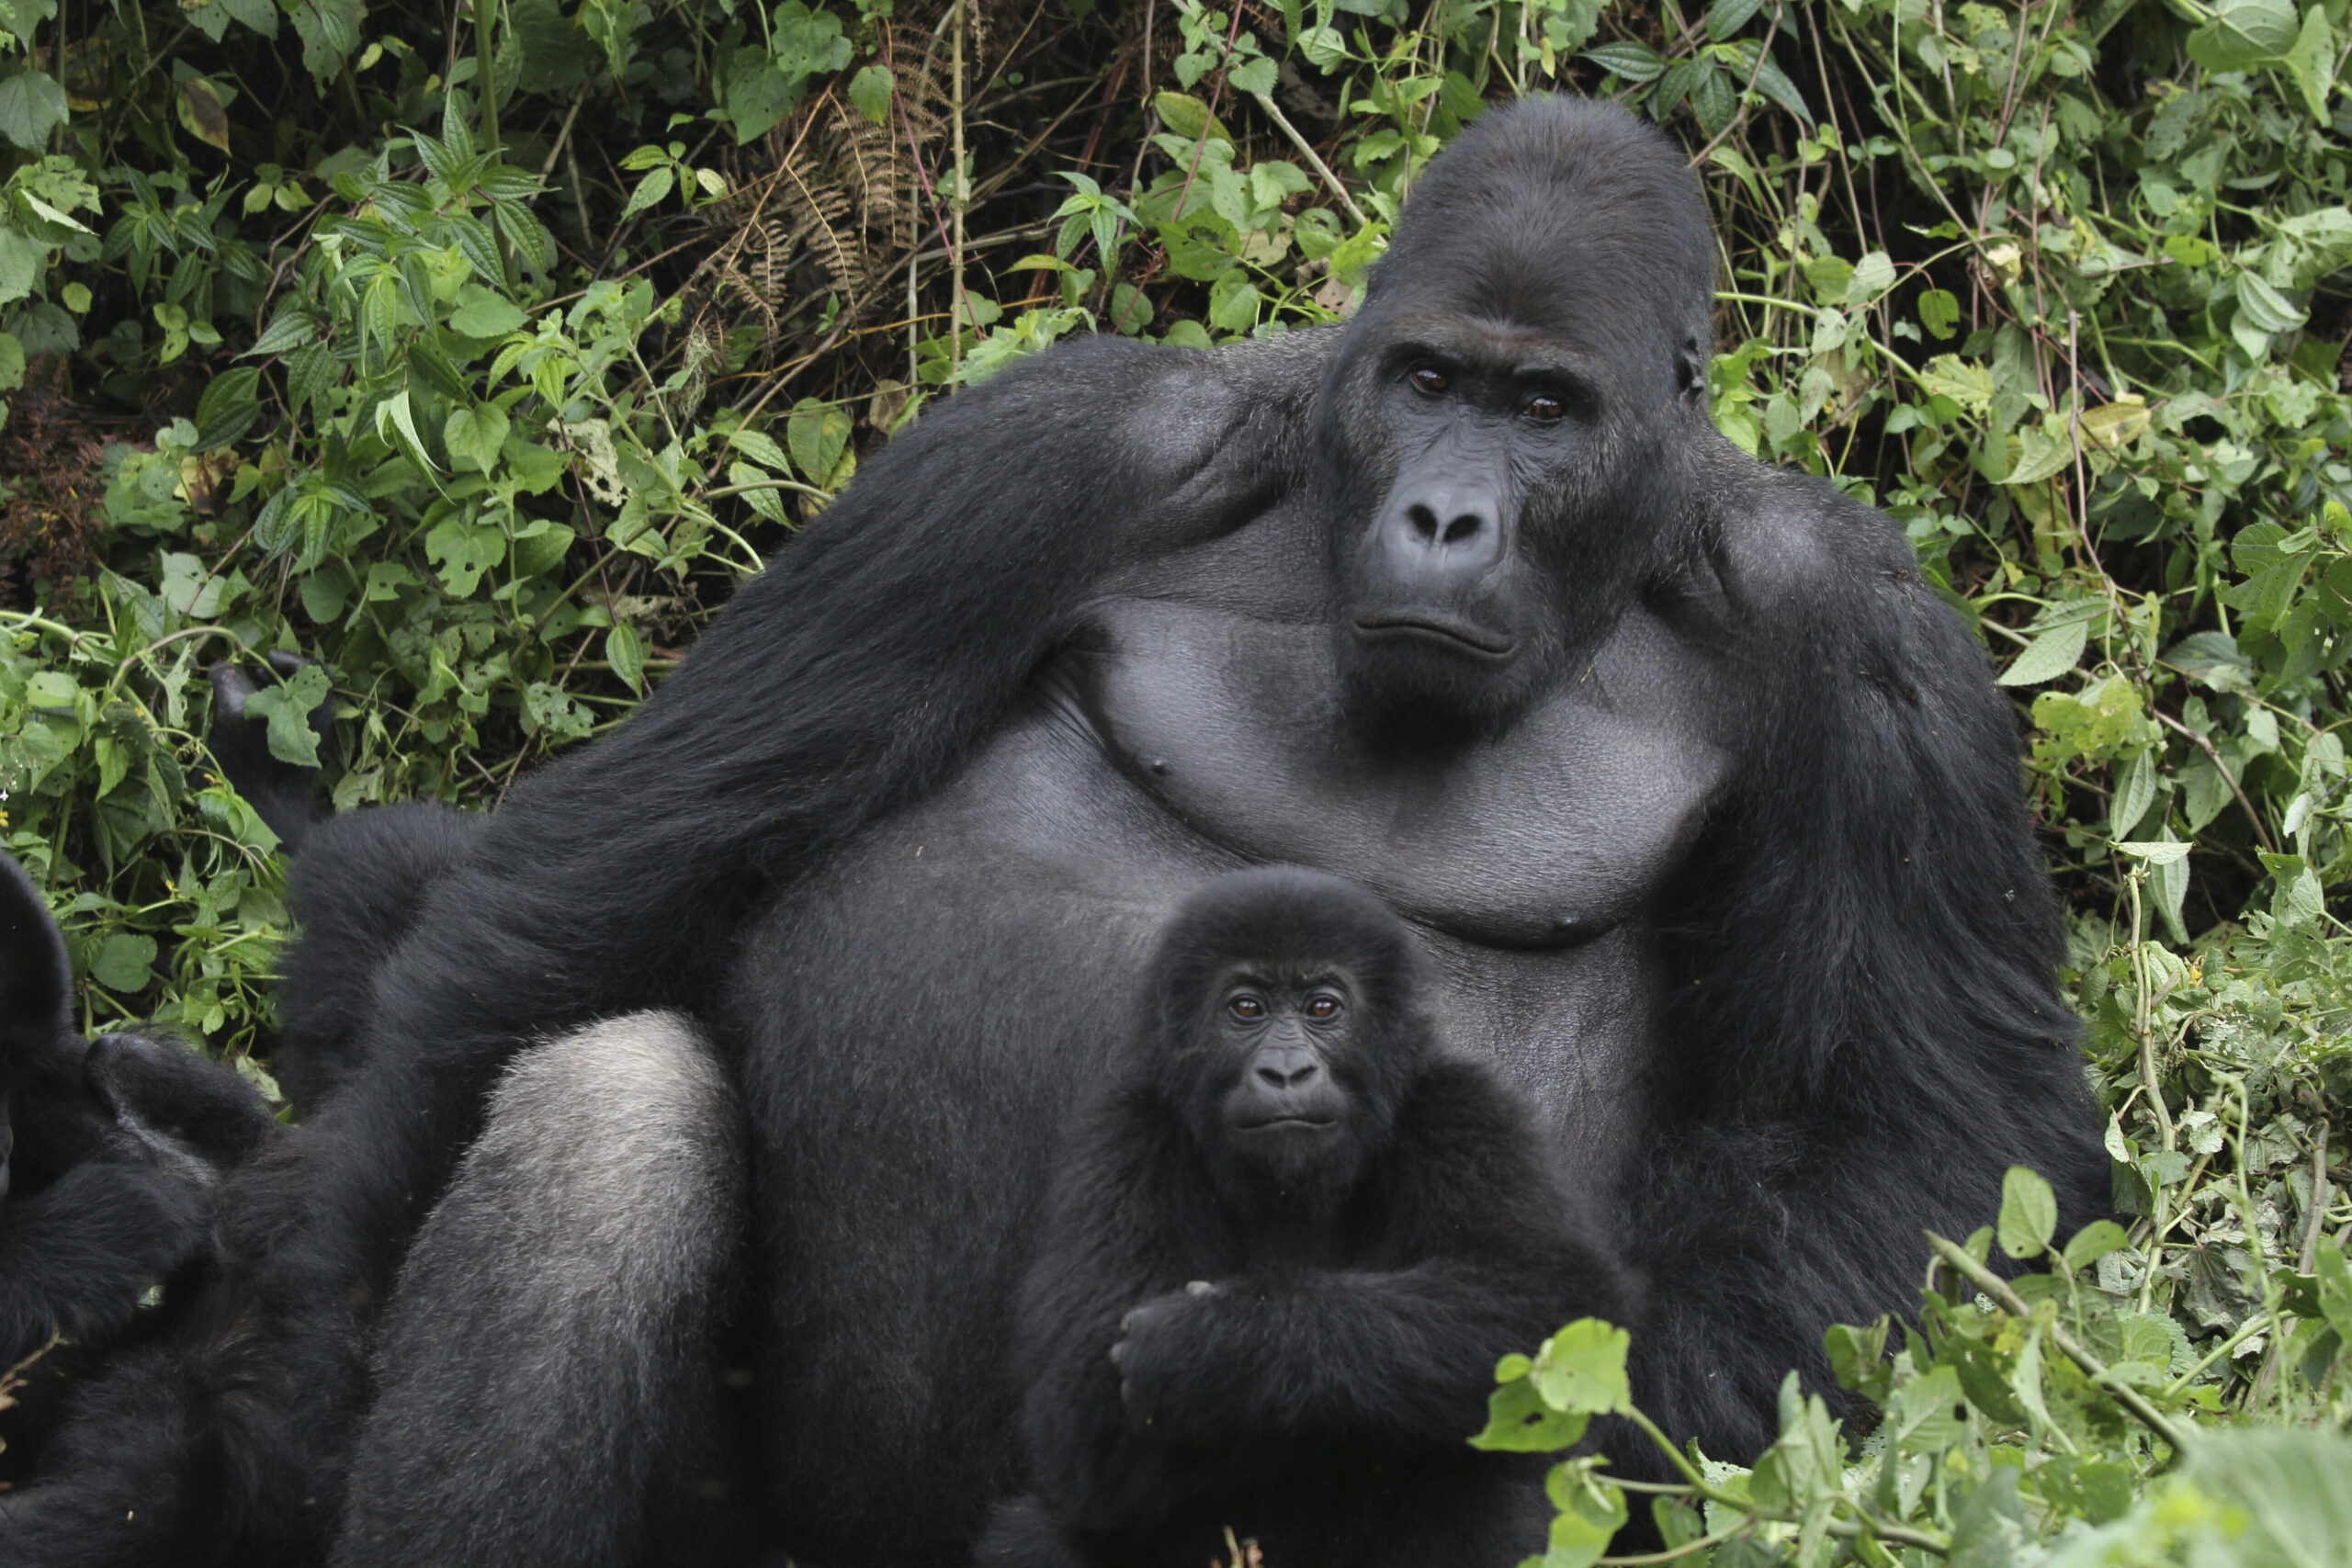 This photo provided by the Dian Fossey Gorilla Fund shows a Silverback and infant Grauer’s gorillas in Kahuzi Biega National Park in the Democratic Republic of Congo on April 17, 2014. On Friday, April 22, 2022, the nonprofit fund announced that more land in eastern Democratic Republic of Congo where Grauer's gorillas live will fall under a community-protection initiative. (Dian Fossey Gorilla Fund via AP)